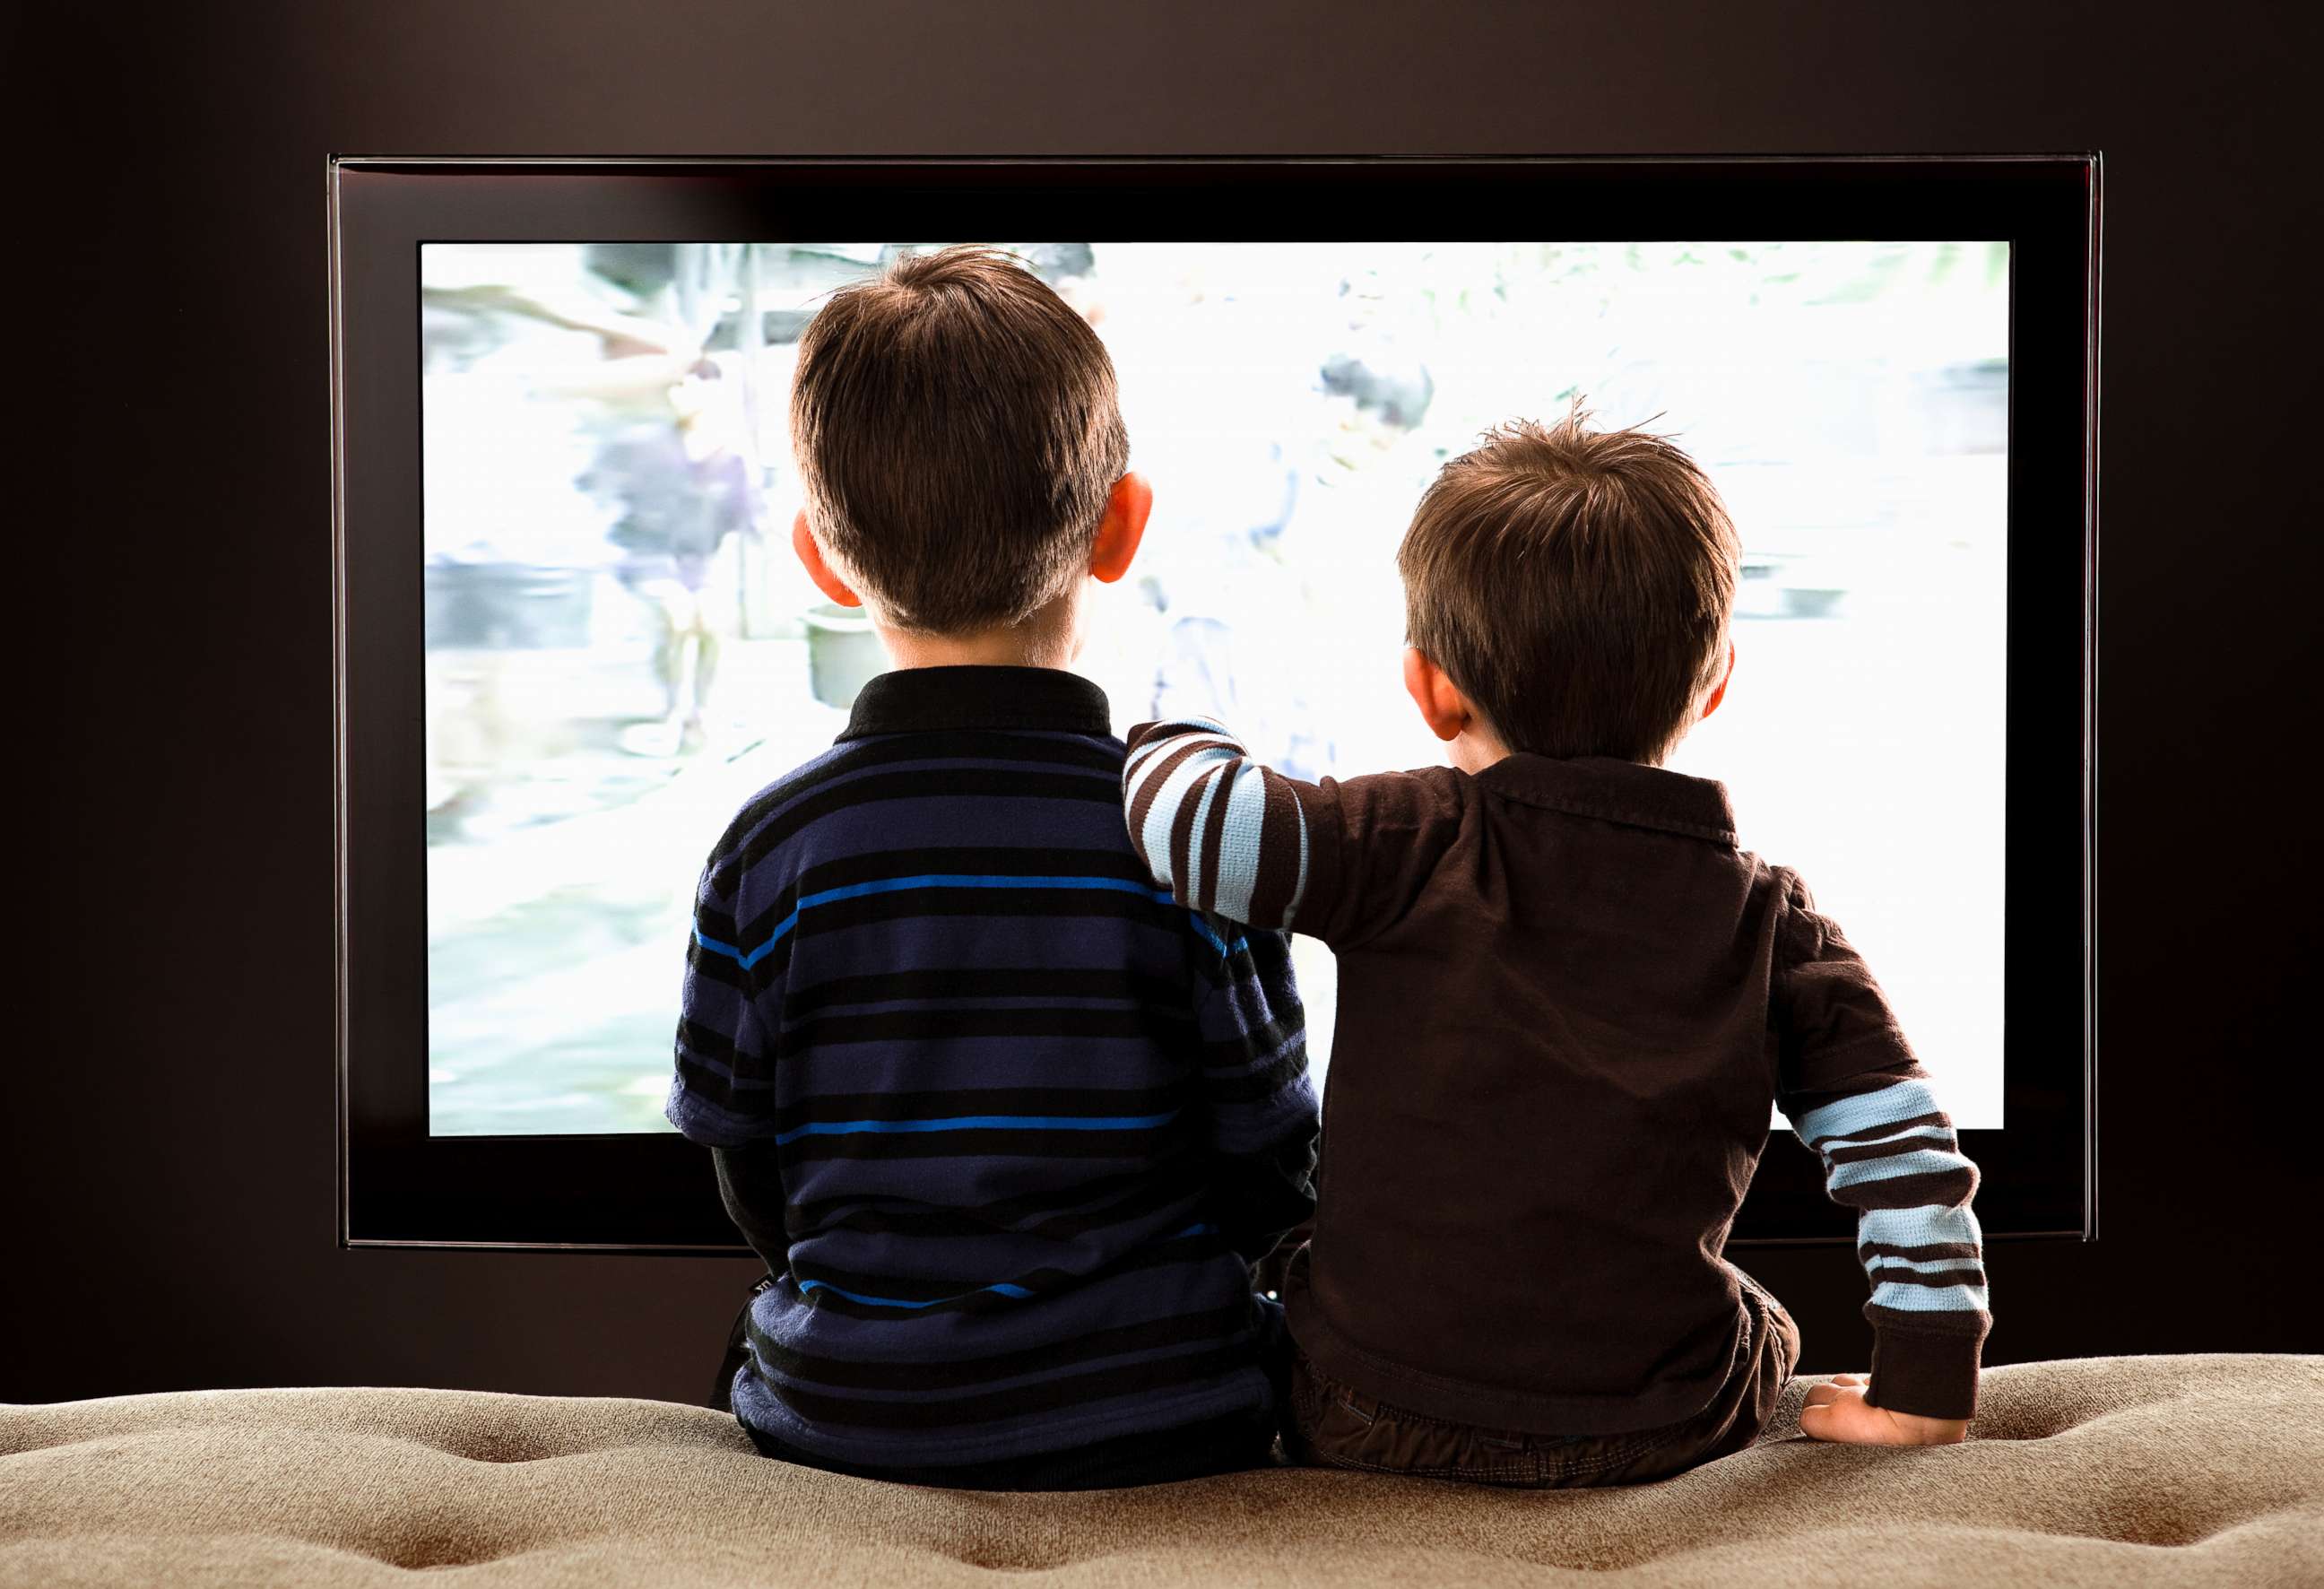 PHOTO: Two children watch television in this stock photo.